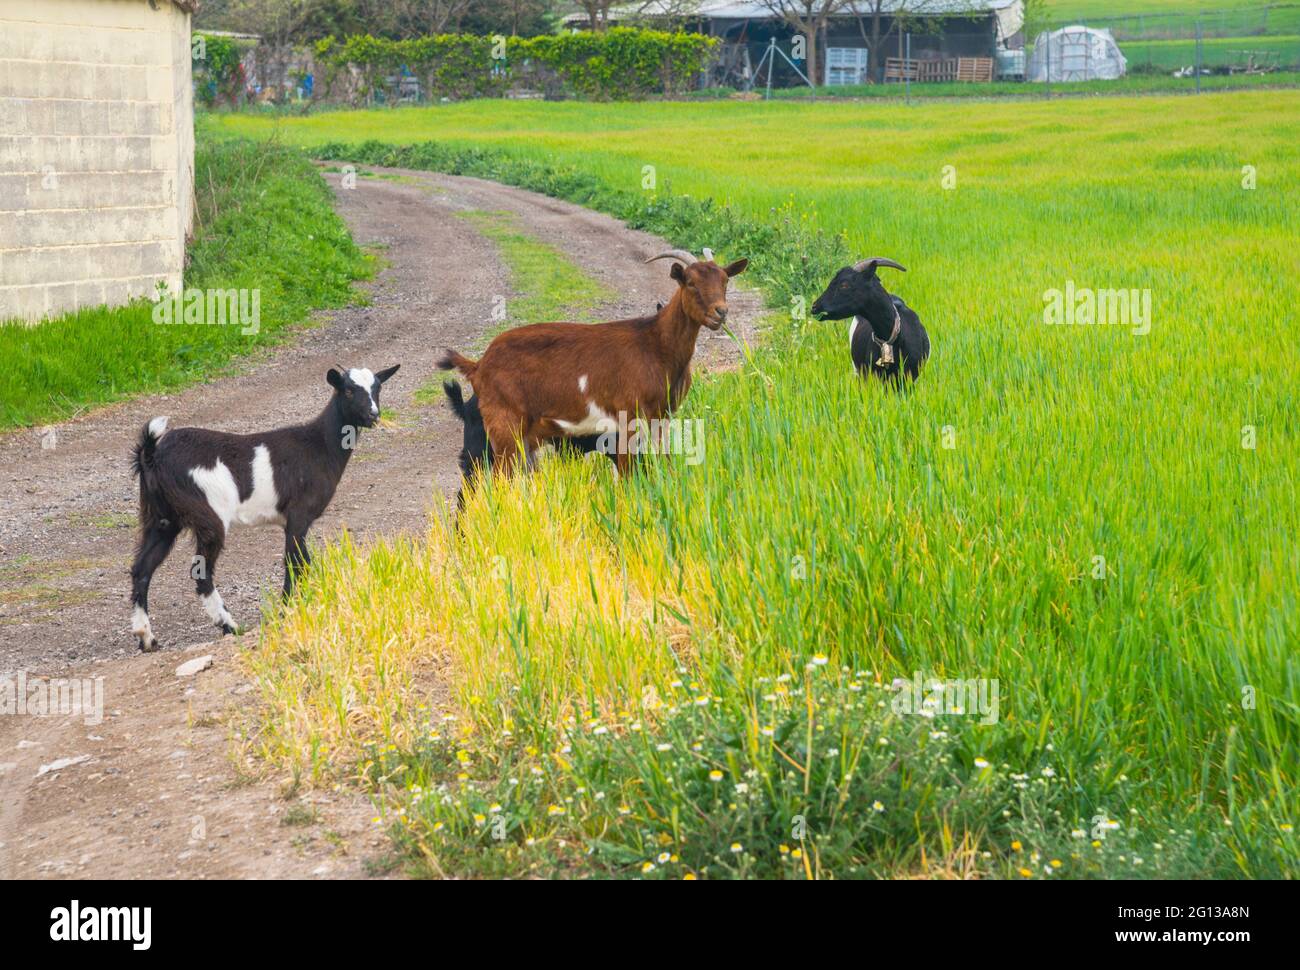 Goats in a field. Stock Photo